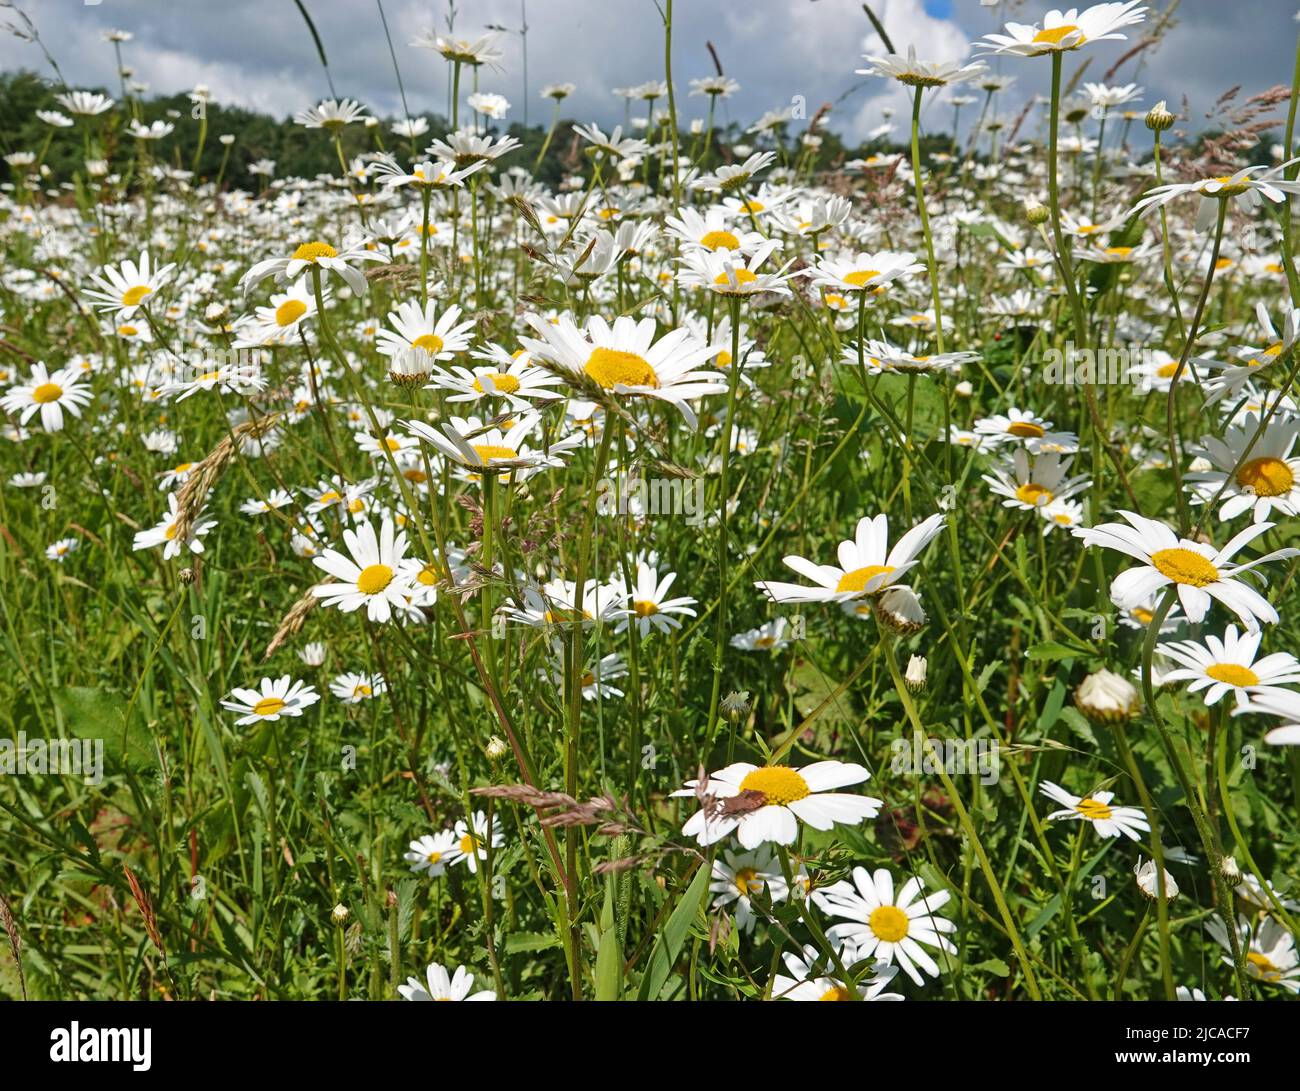 A large amount of daisies (latin name: leucanthemum vulgare)  blooming is a meadow. Seen in Uelsen, Germany Stock Photo